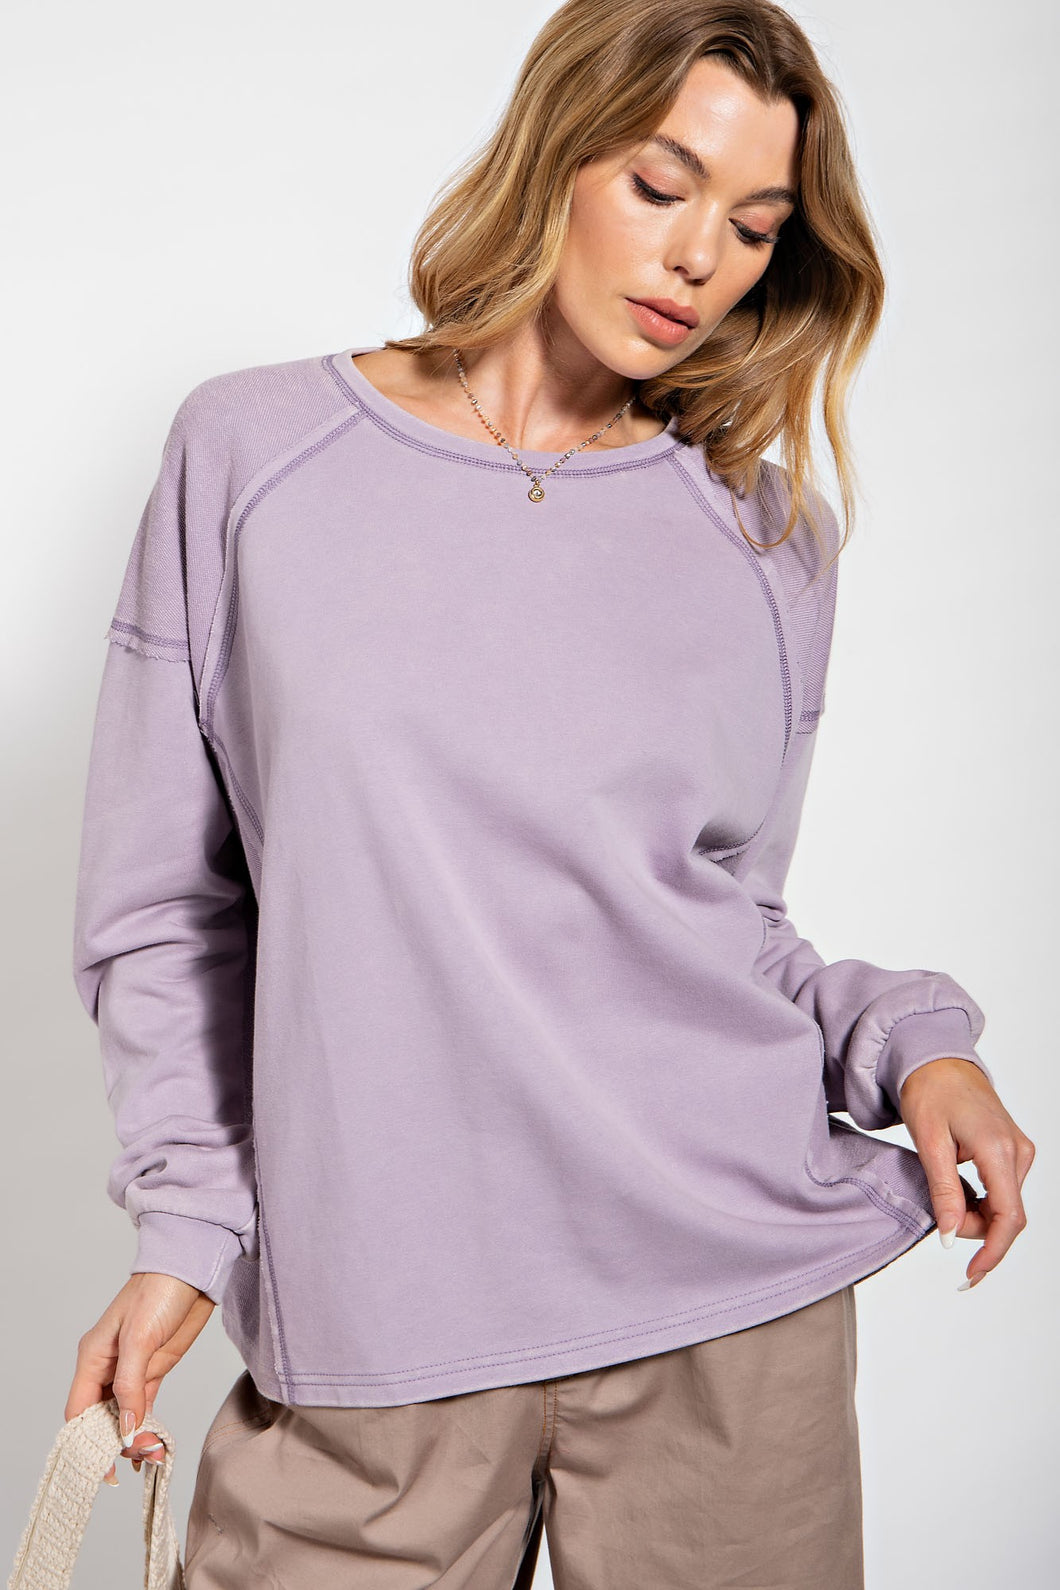 Easel Inside Out Terry Knit Top in Dusty Lilac Shirts & Tops Easel   